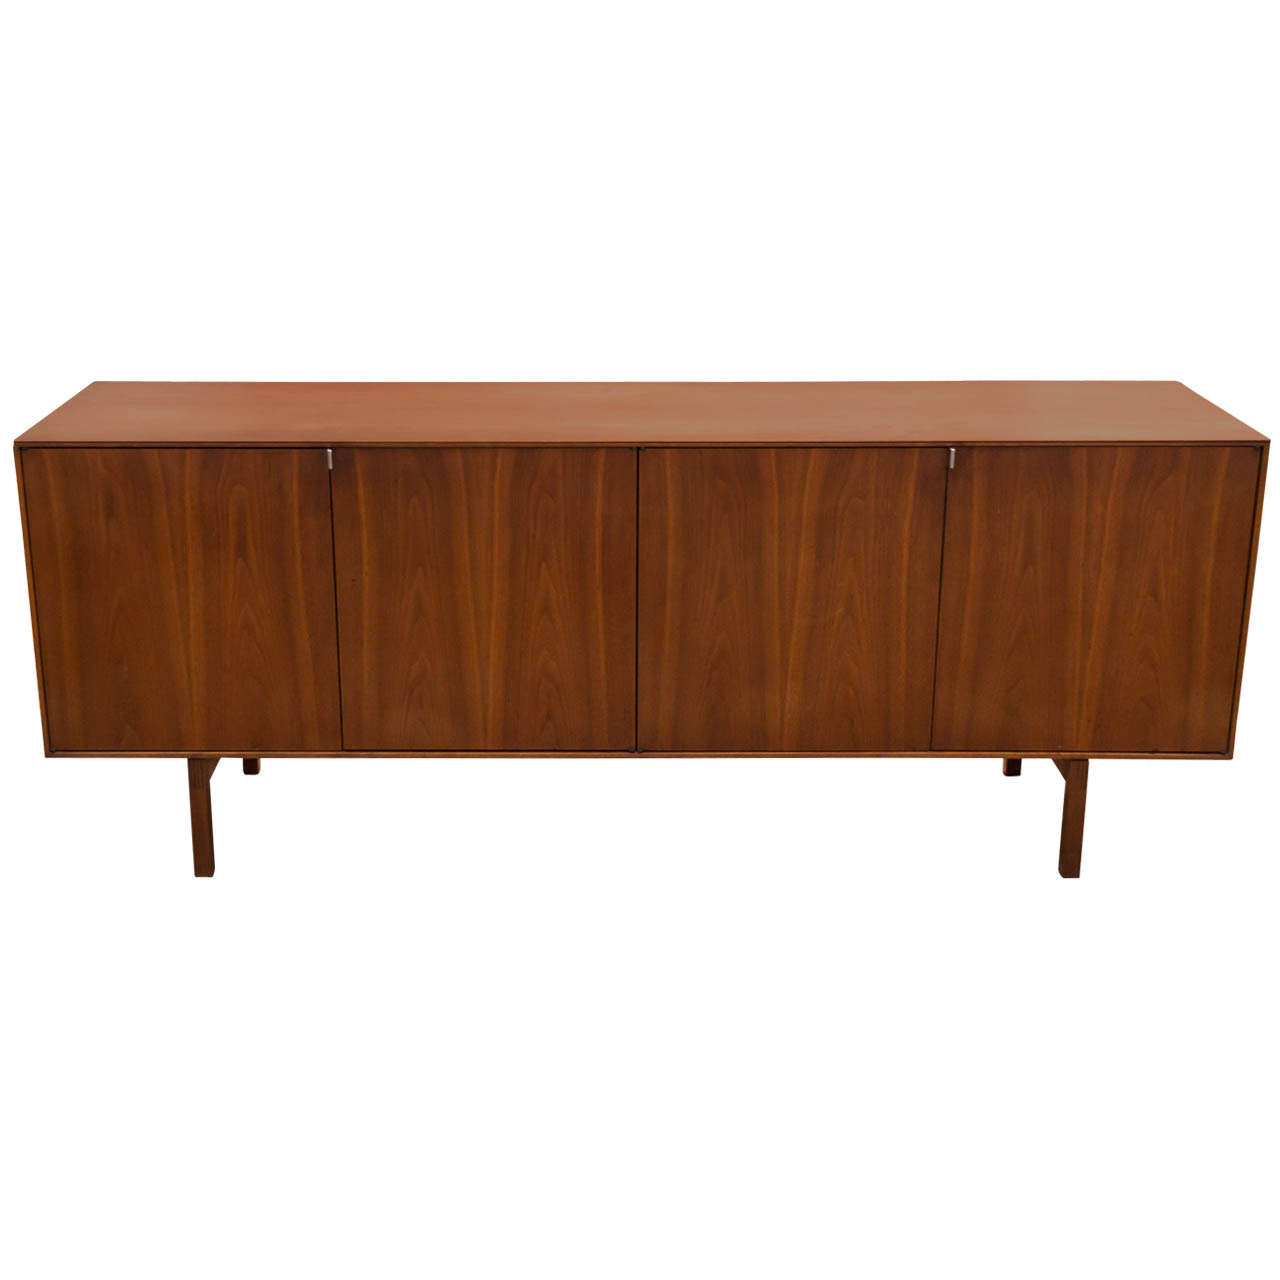 Florence Knoll - Low Wooden Credenza